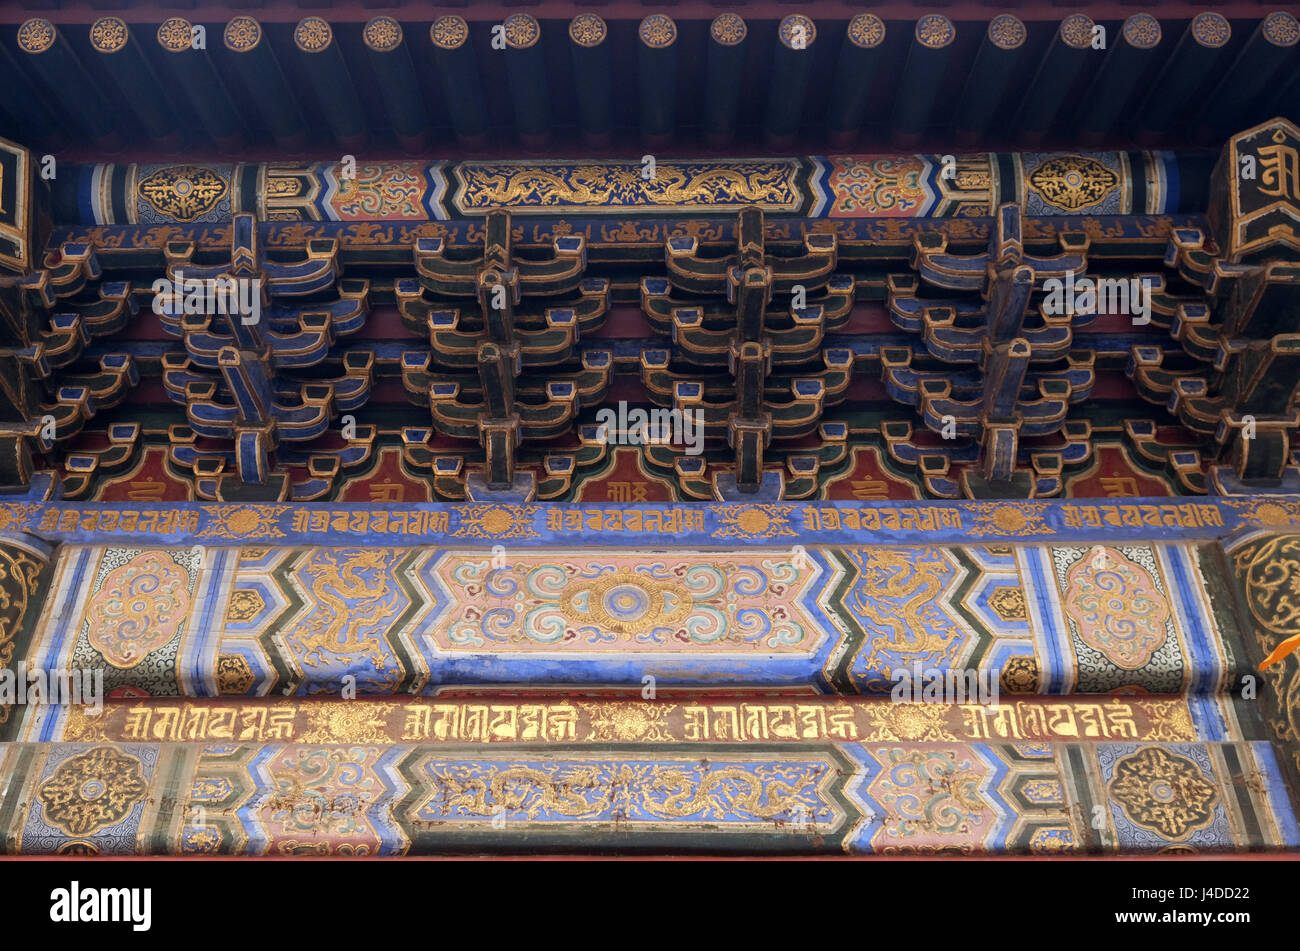 Colorful ceiling decoration at the of The Lama Yonghe Temple in Beijing, China, February 25, 2016. Stock Photo